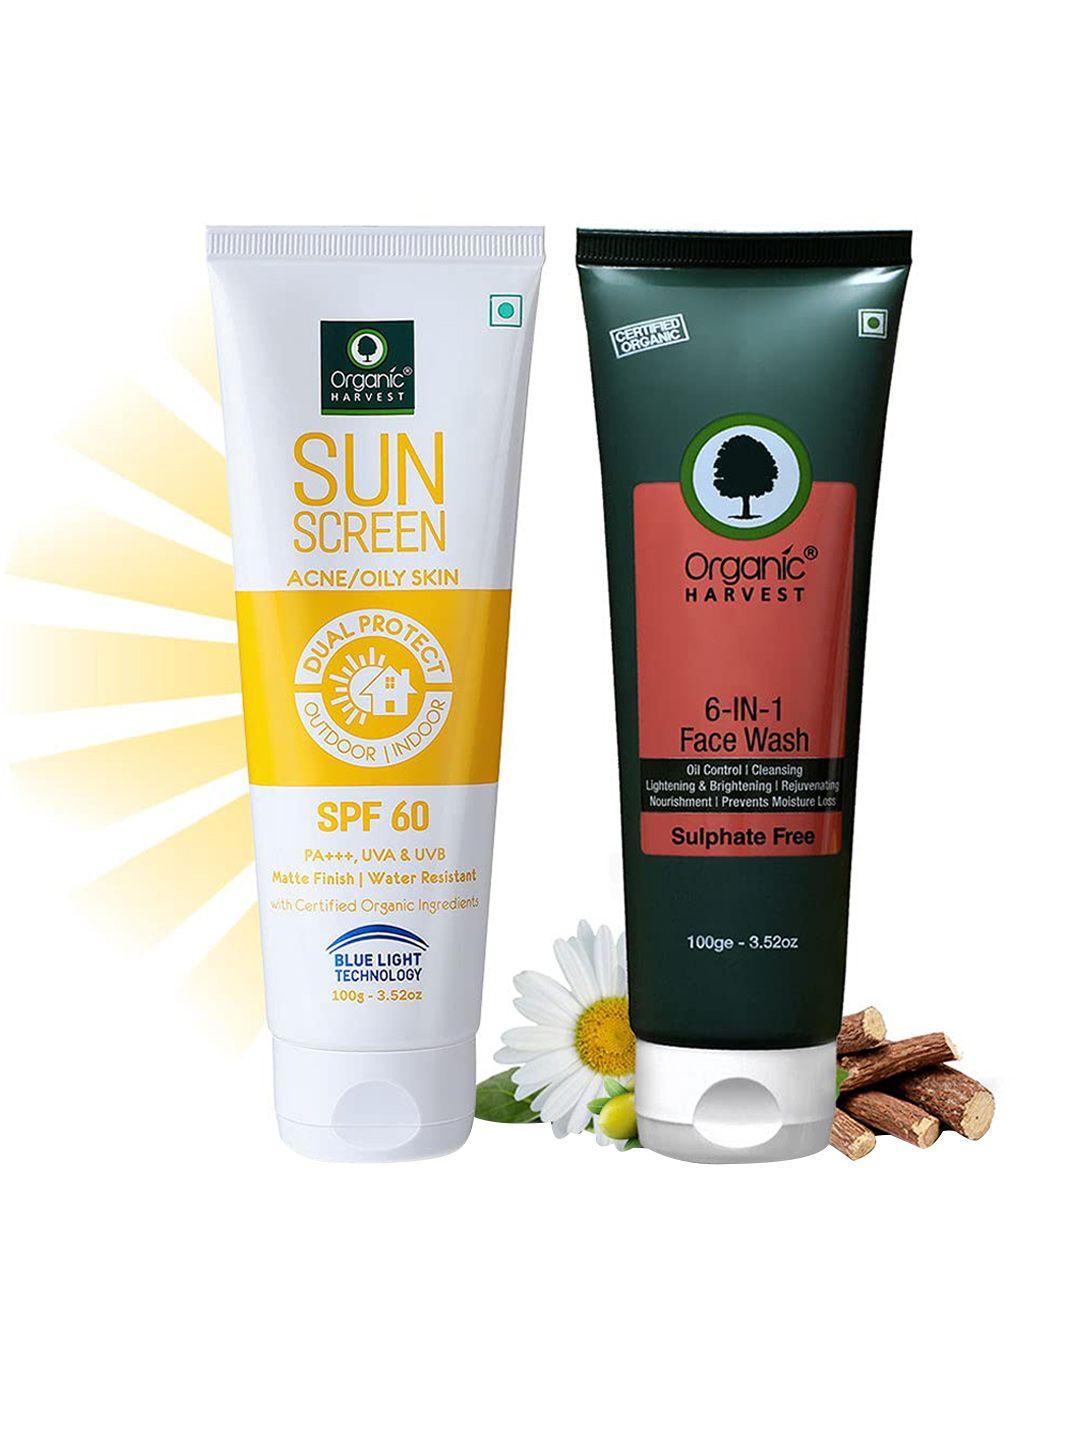 organic harvest set of 6-in-1 face wash & spf 60 sunscreen - 100 g each